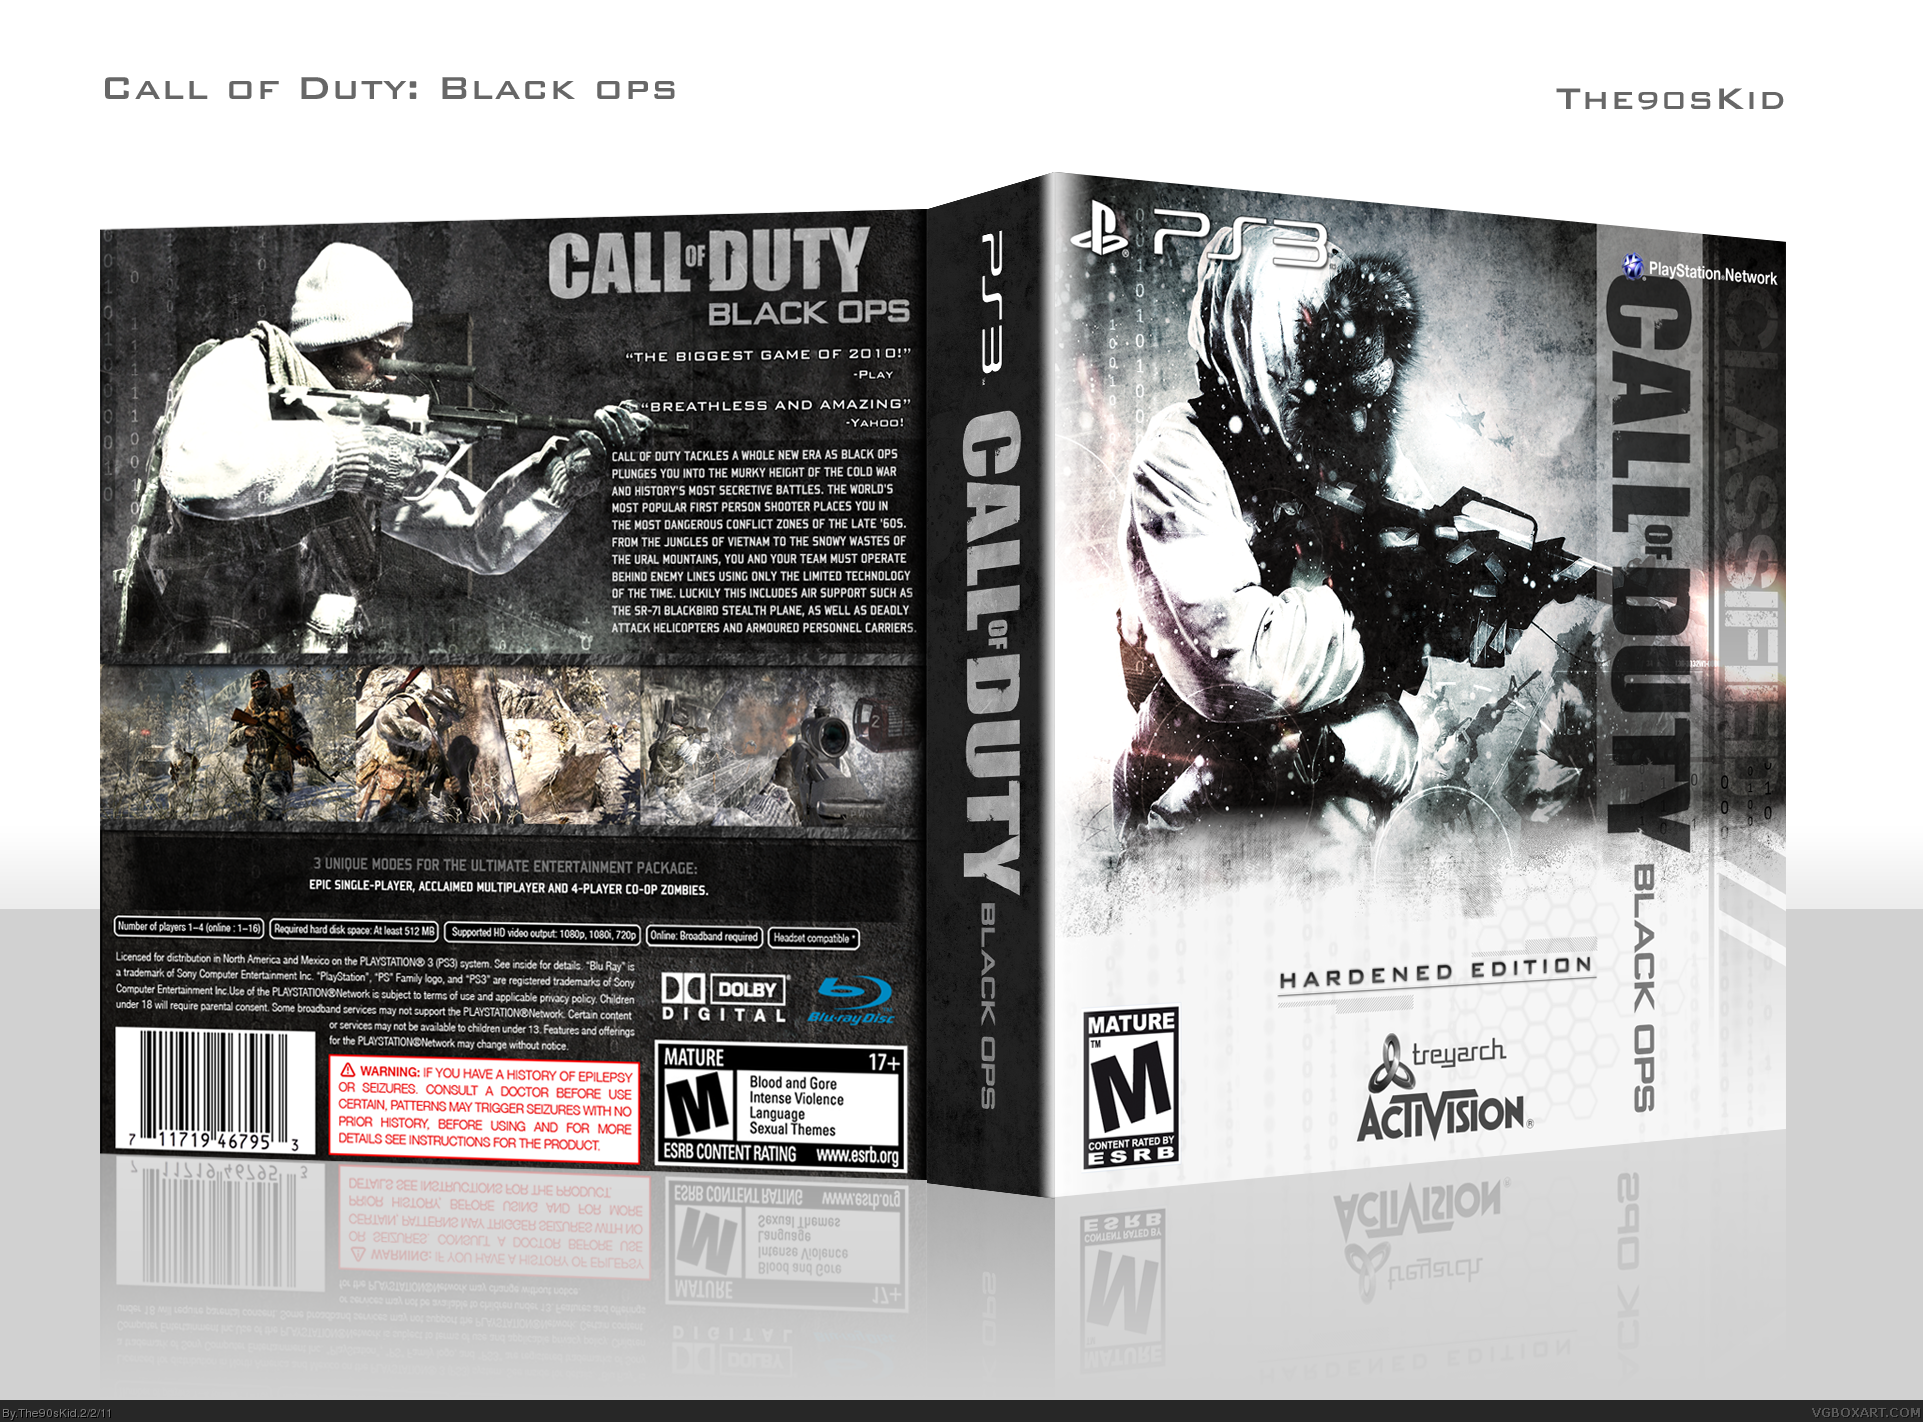 Call of Duty Black Ops: Hardened Edition box cover